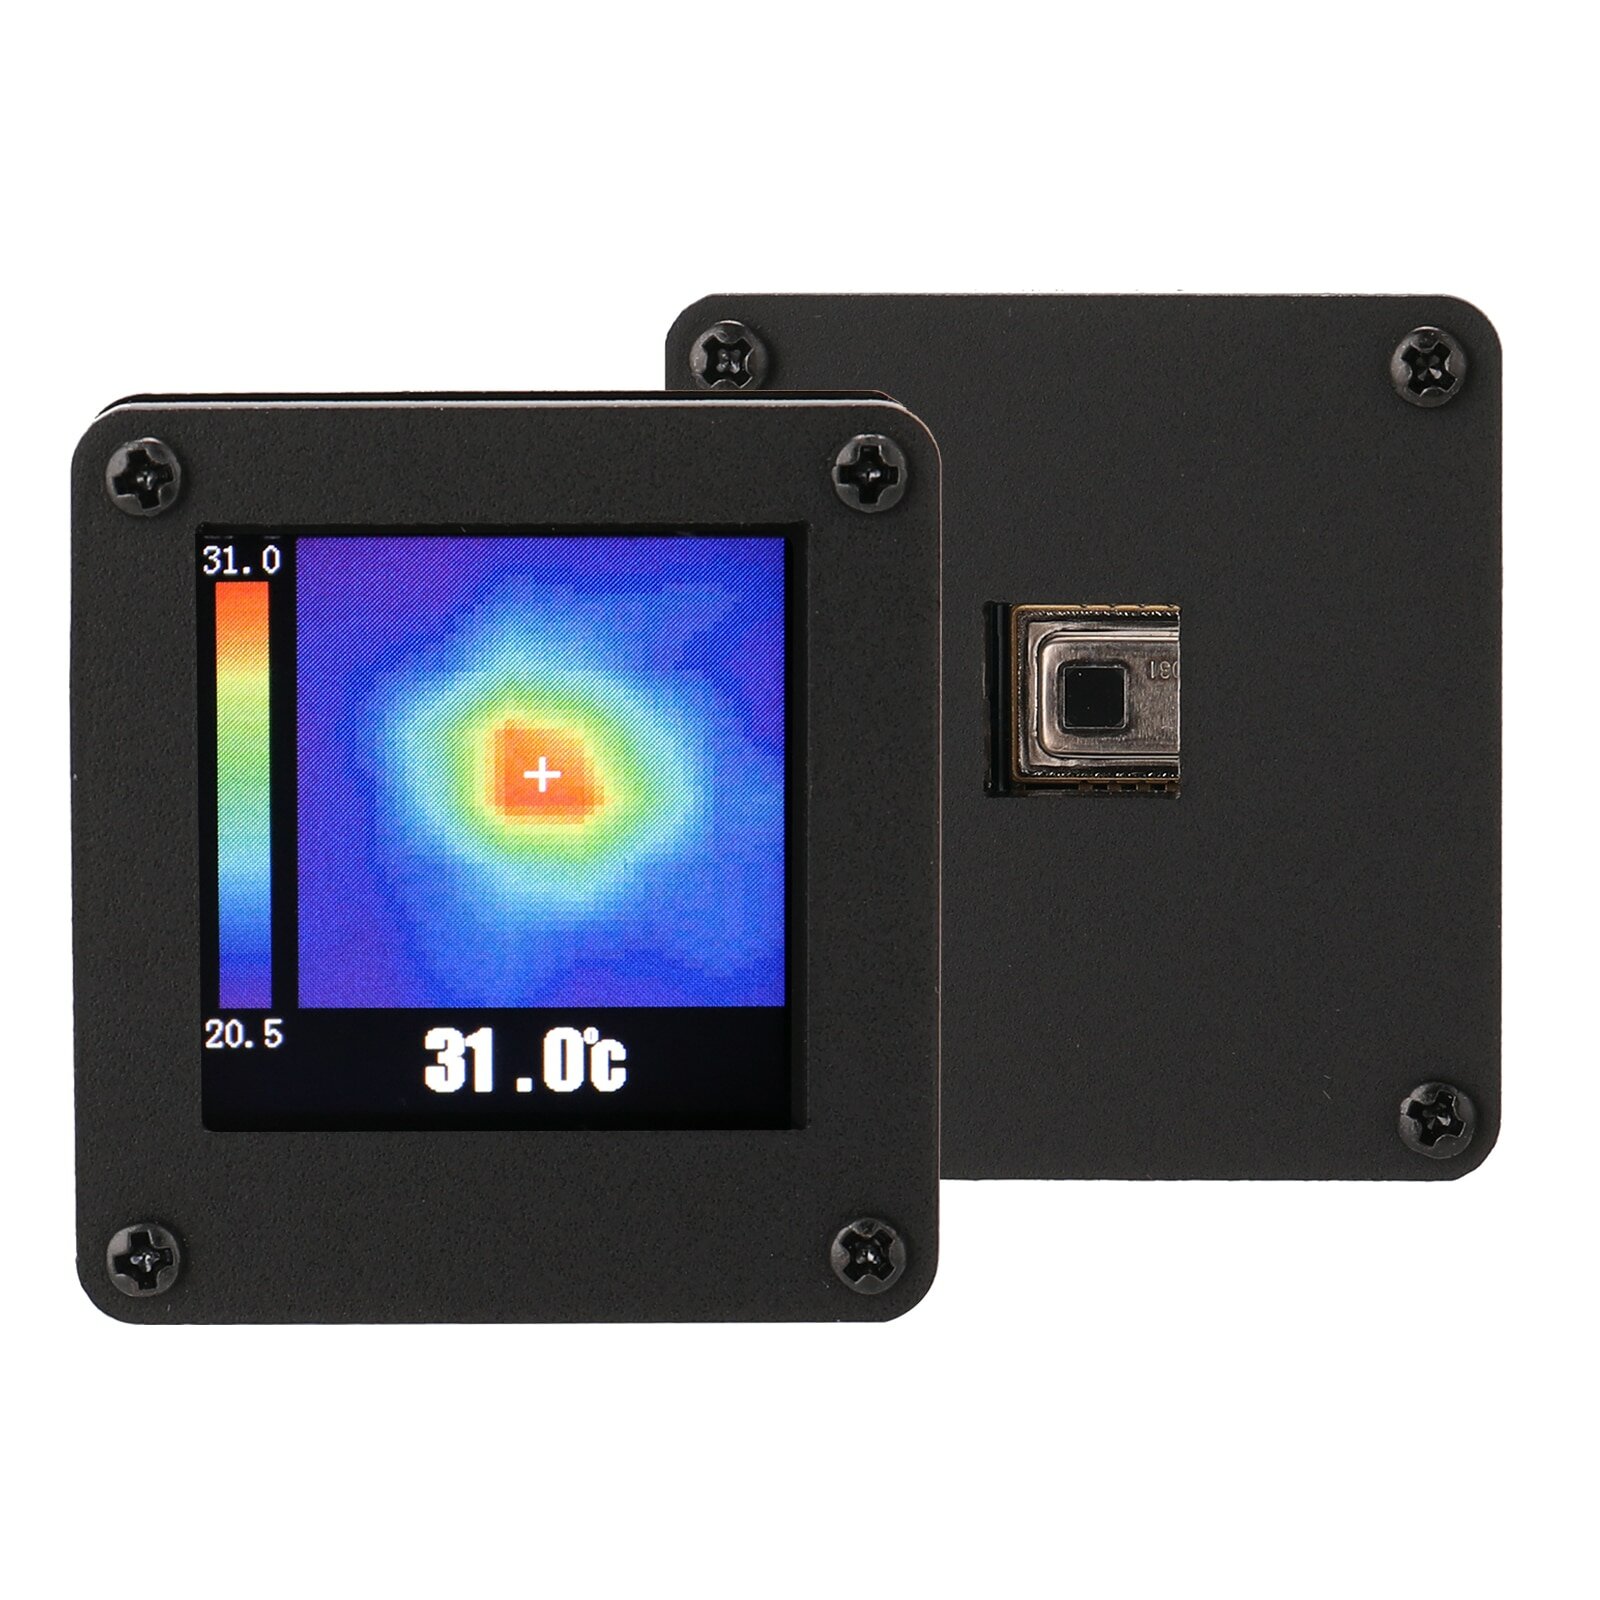 

AMG8833 IR 8*8 Infrared Thermal Imager Thermograph Camera Array Temperature Sensor 7M Farthest Detection Distance with H